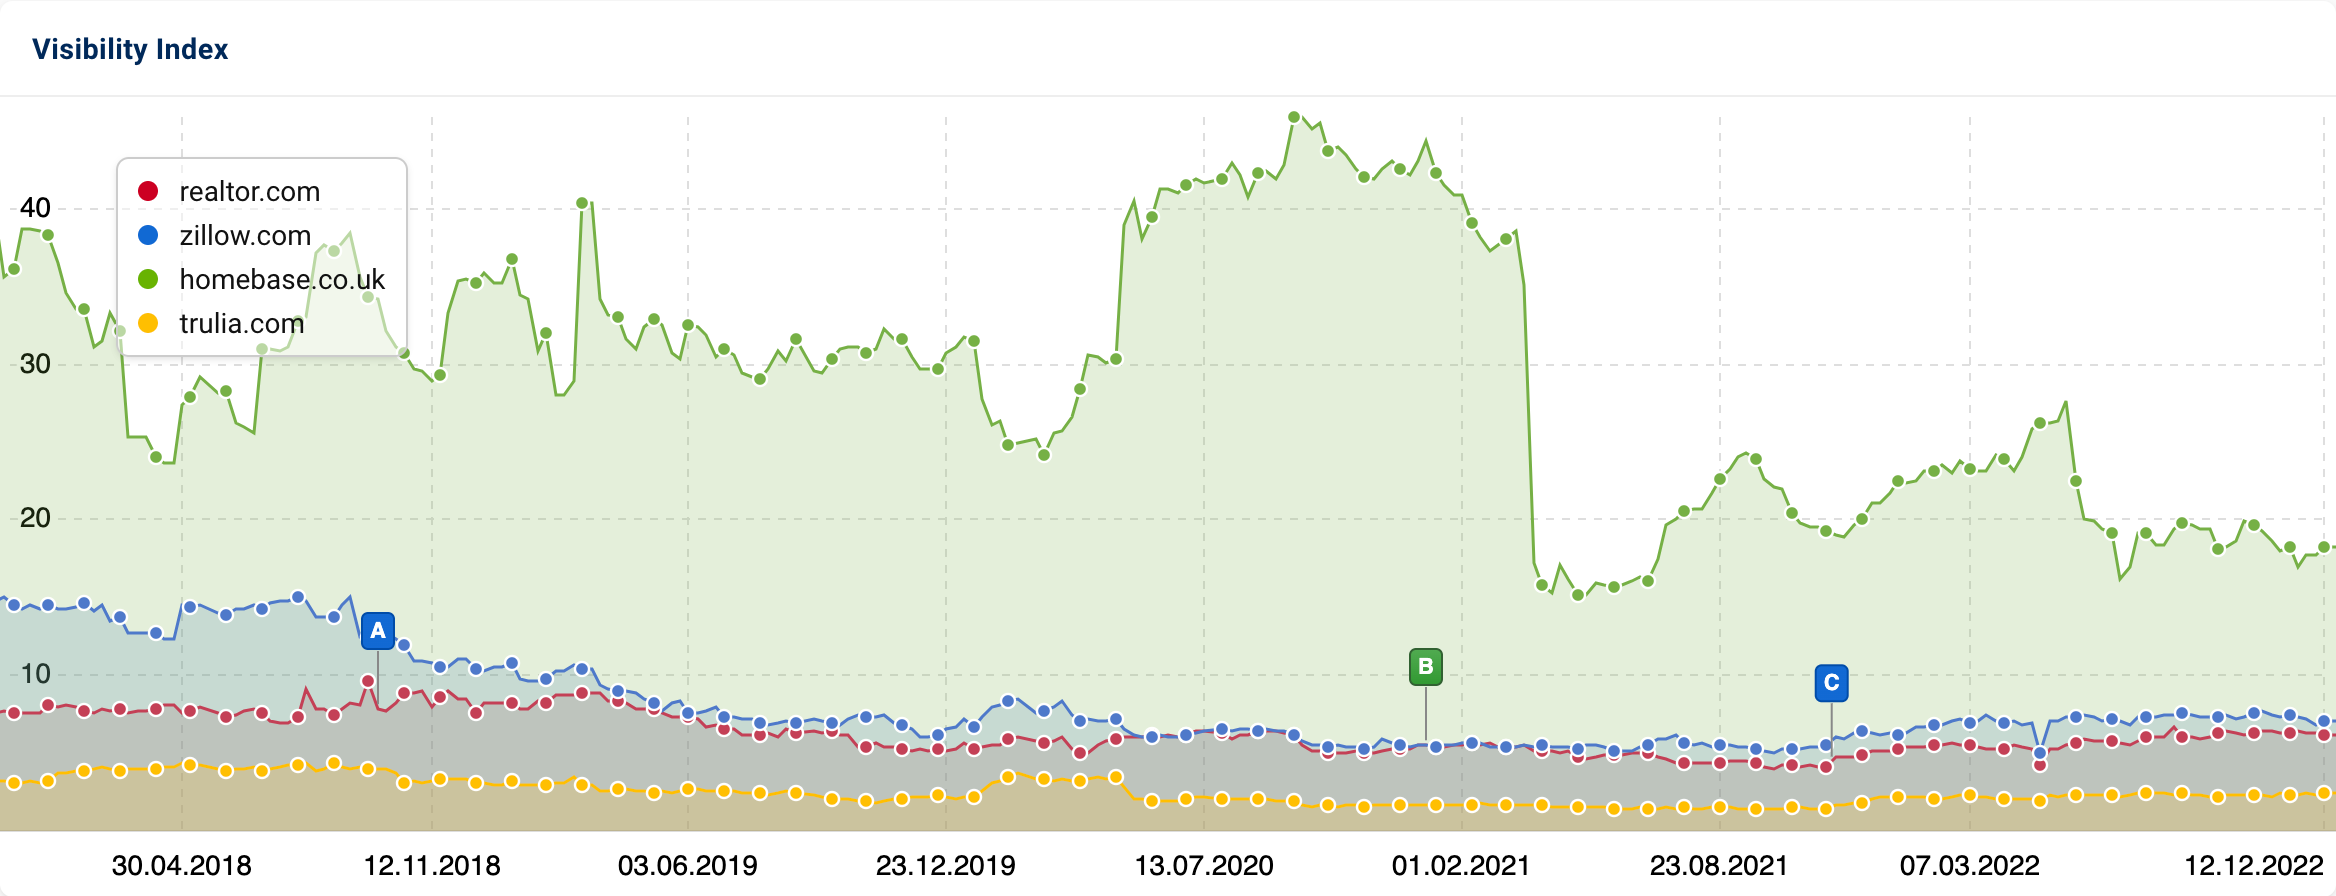 The graphs shows the Visibility trends of the four domains from the beginning of 2018 to the end of 2022. Around the beginning of 2020, the domain homebase.co.uk gained Visibility.